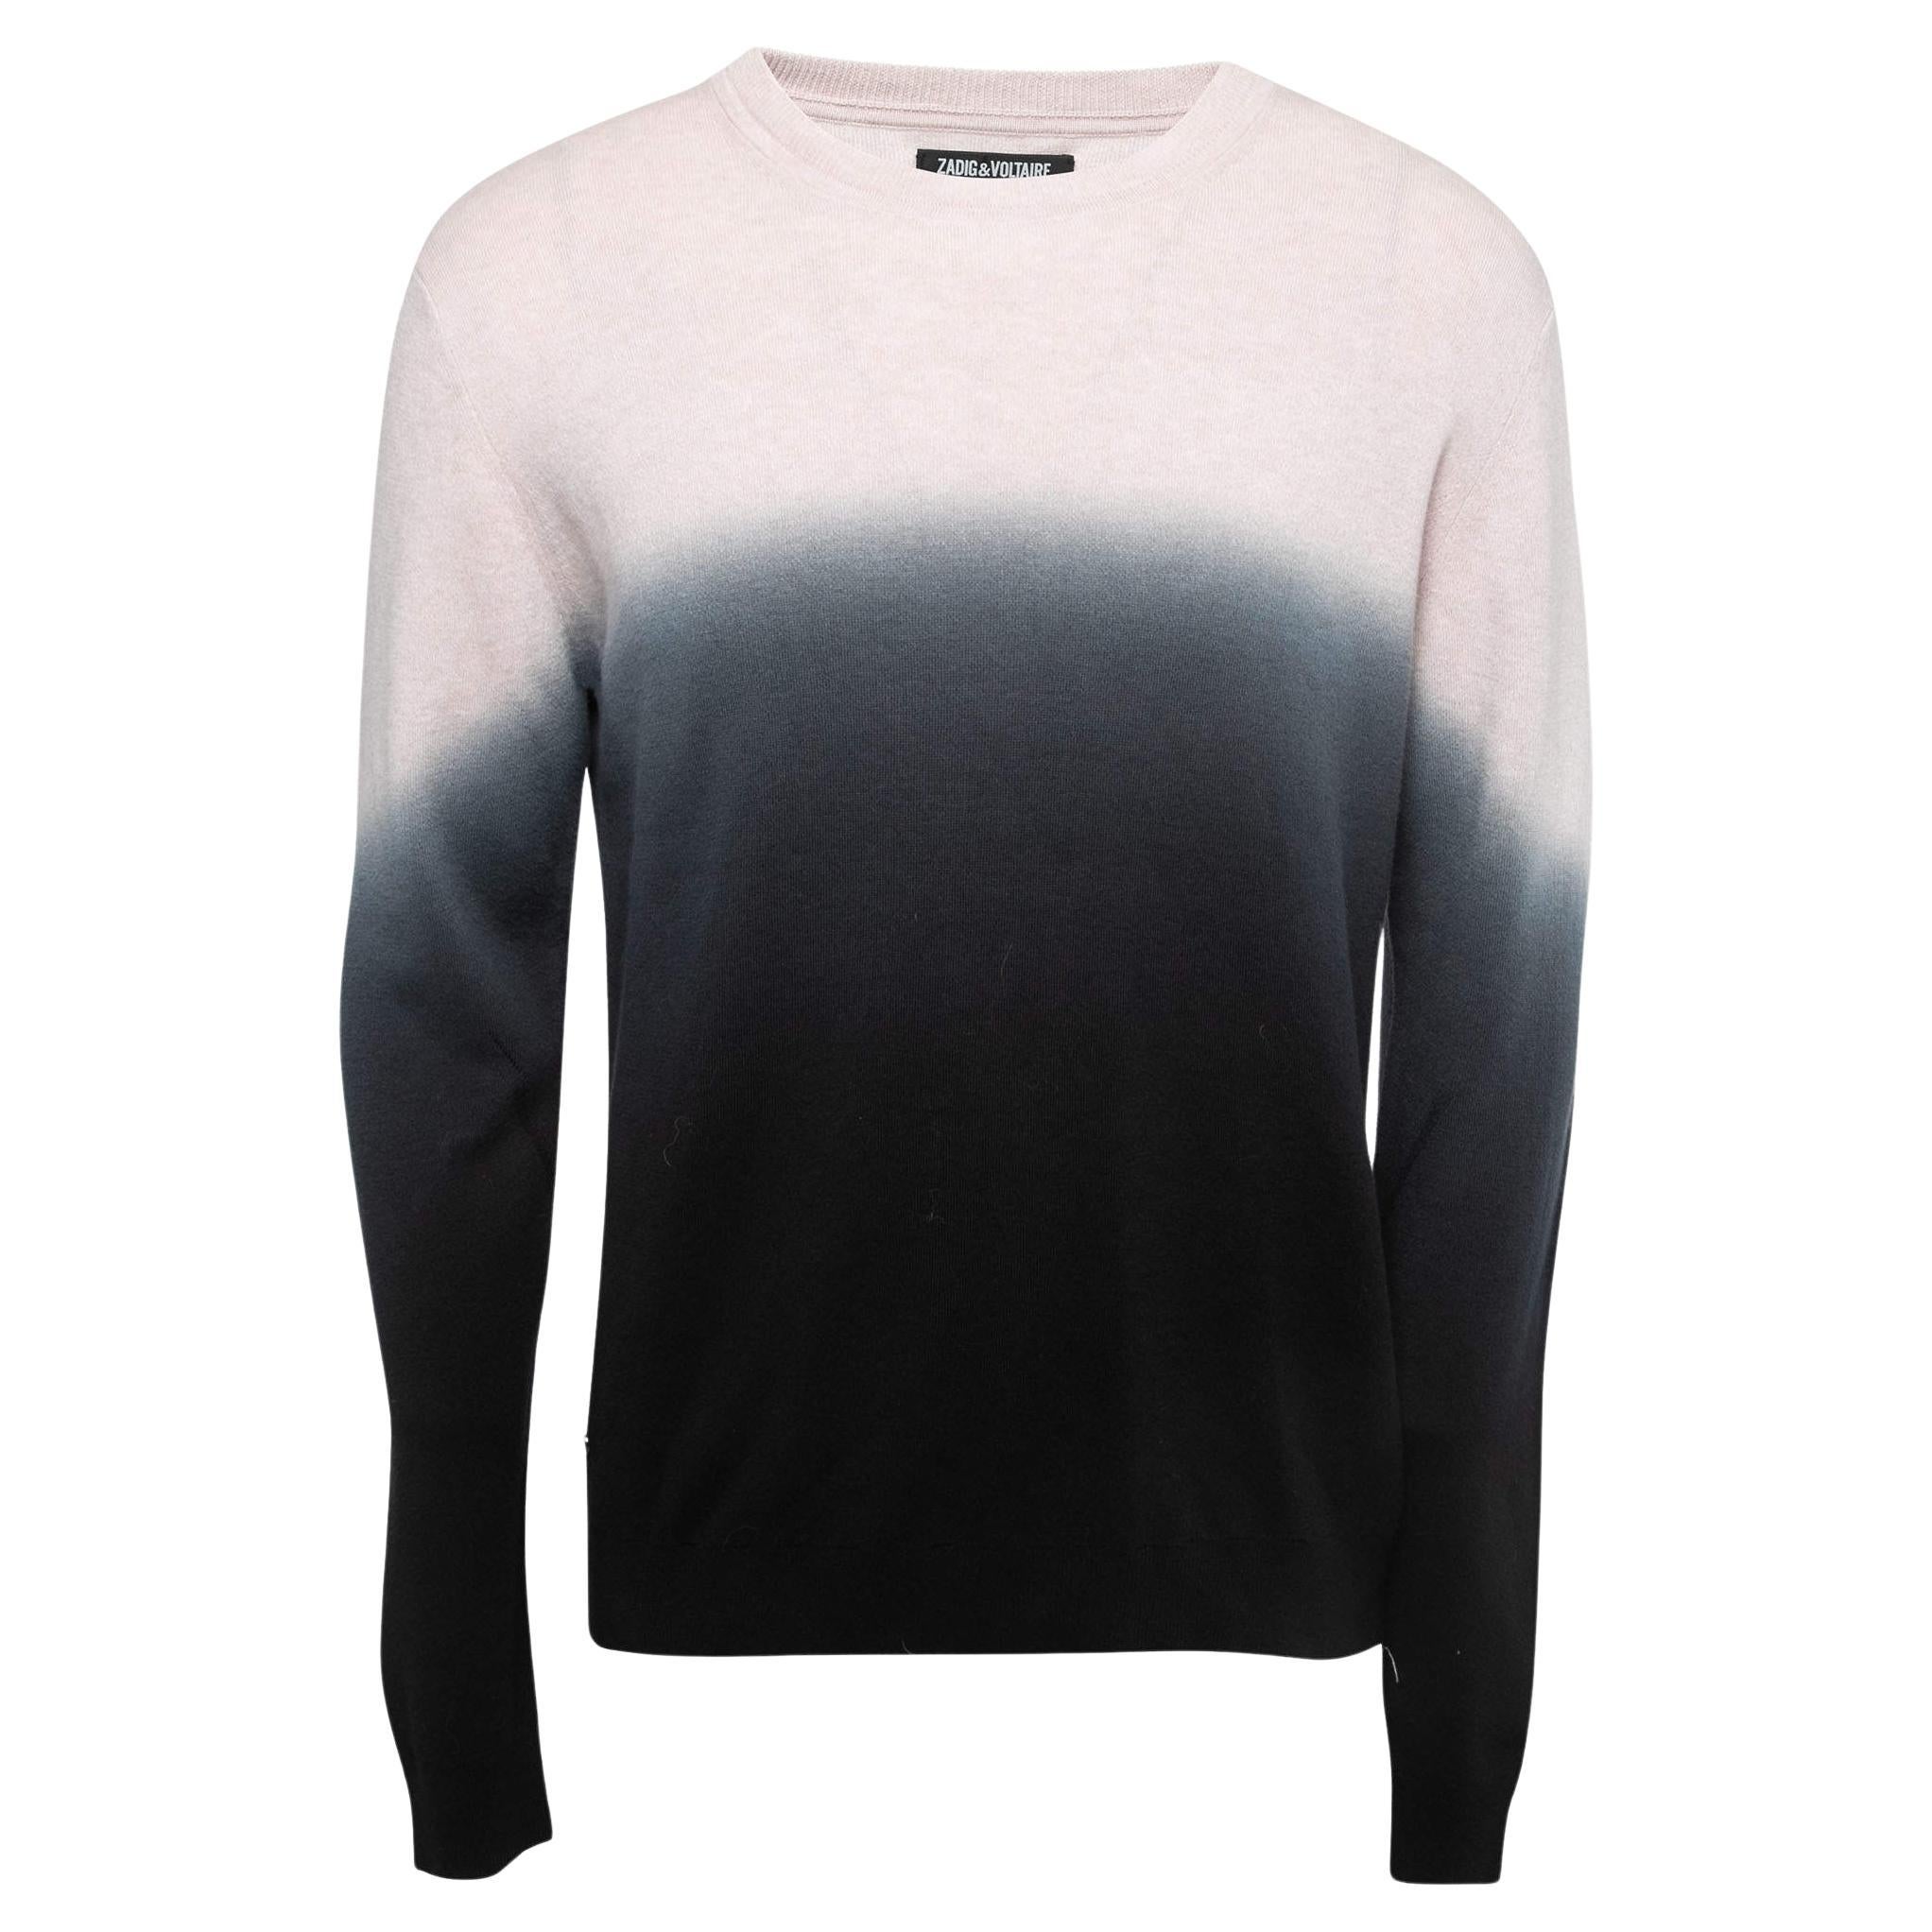 Zadig & Voltaire Pink/Blue Ombre Knit Kennedy Sweater L